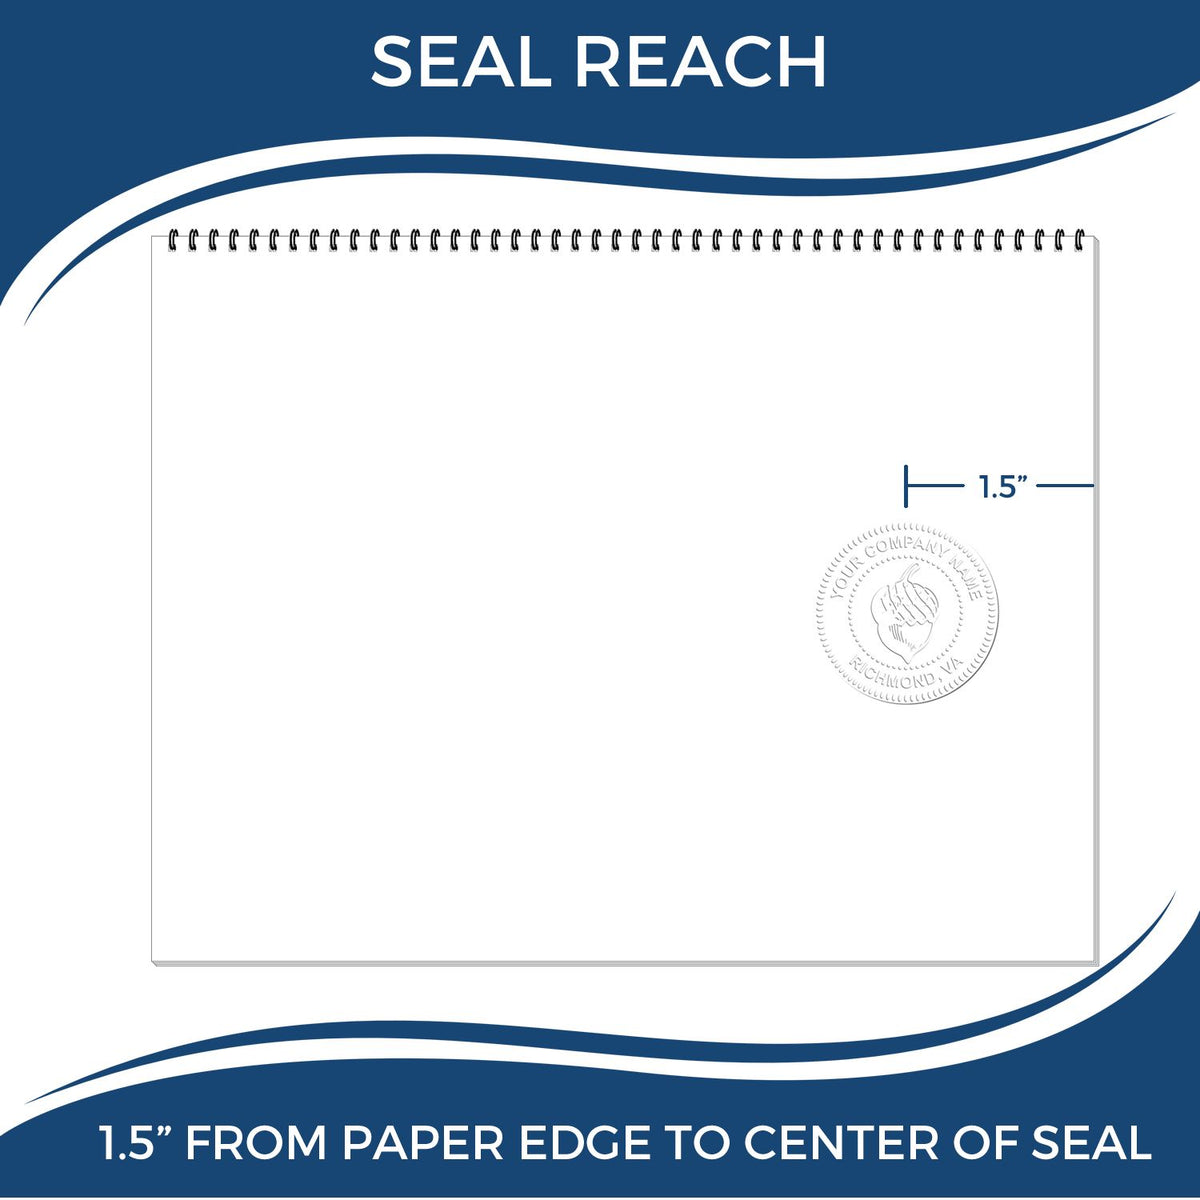 An infographic showing the seal reach which is represented by a ruler and a miniature seal image of the Louisiana Geologist Desk Seal